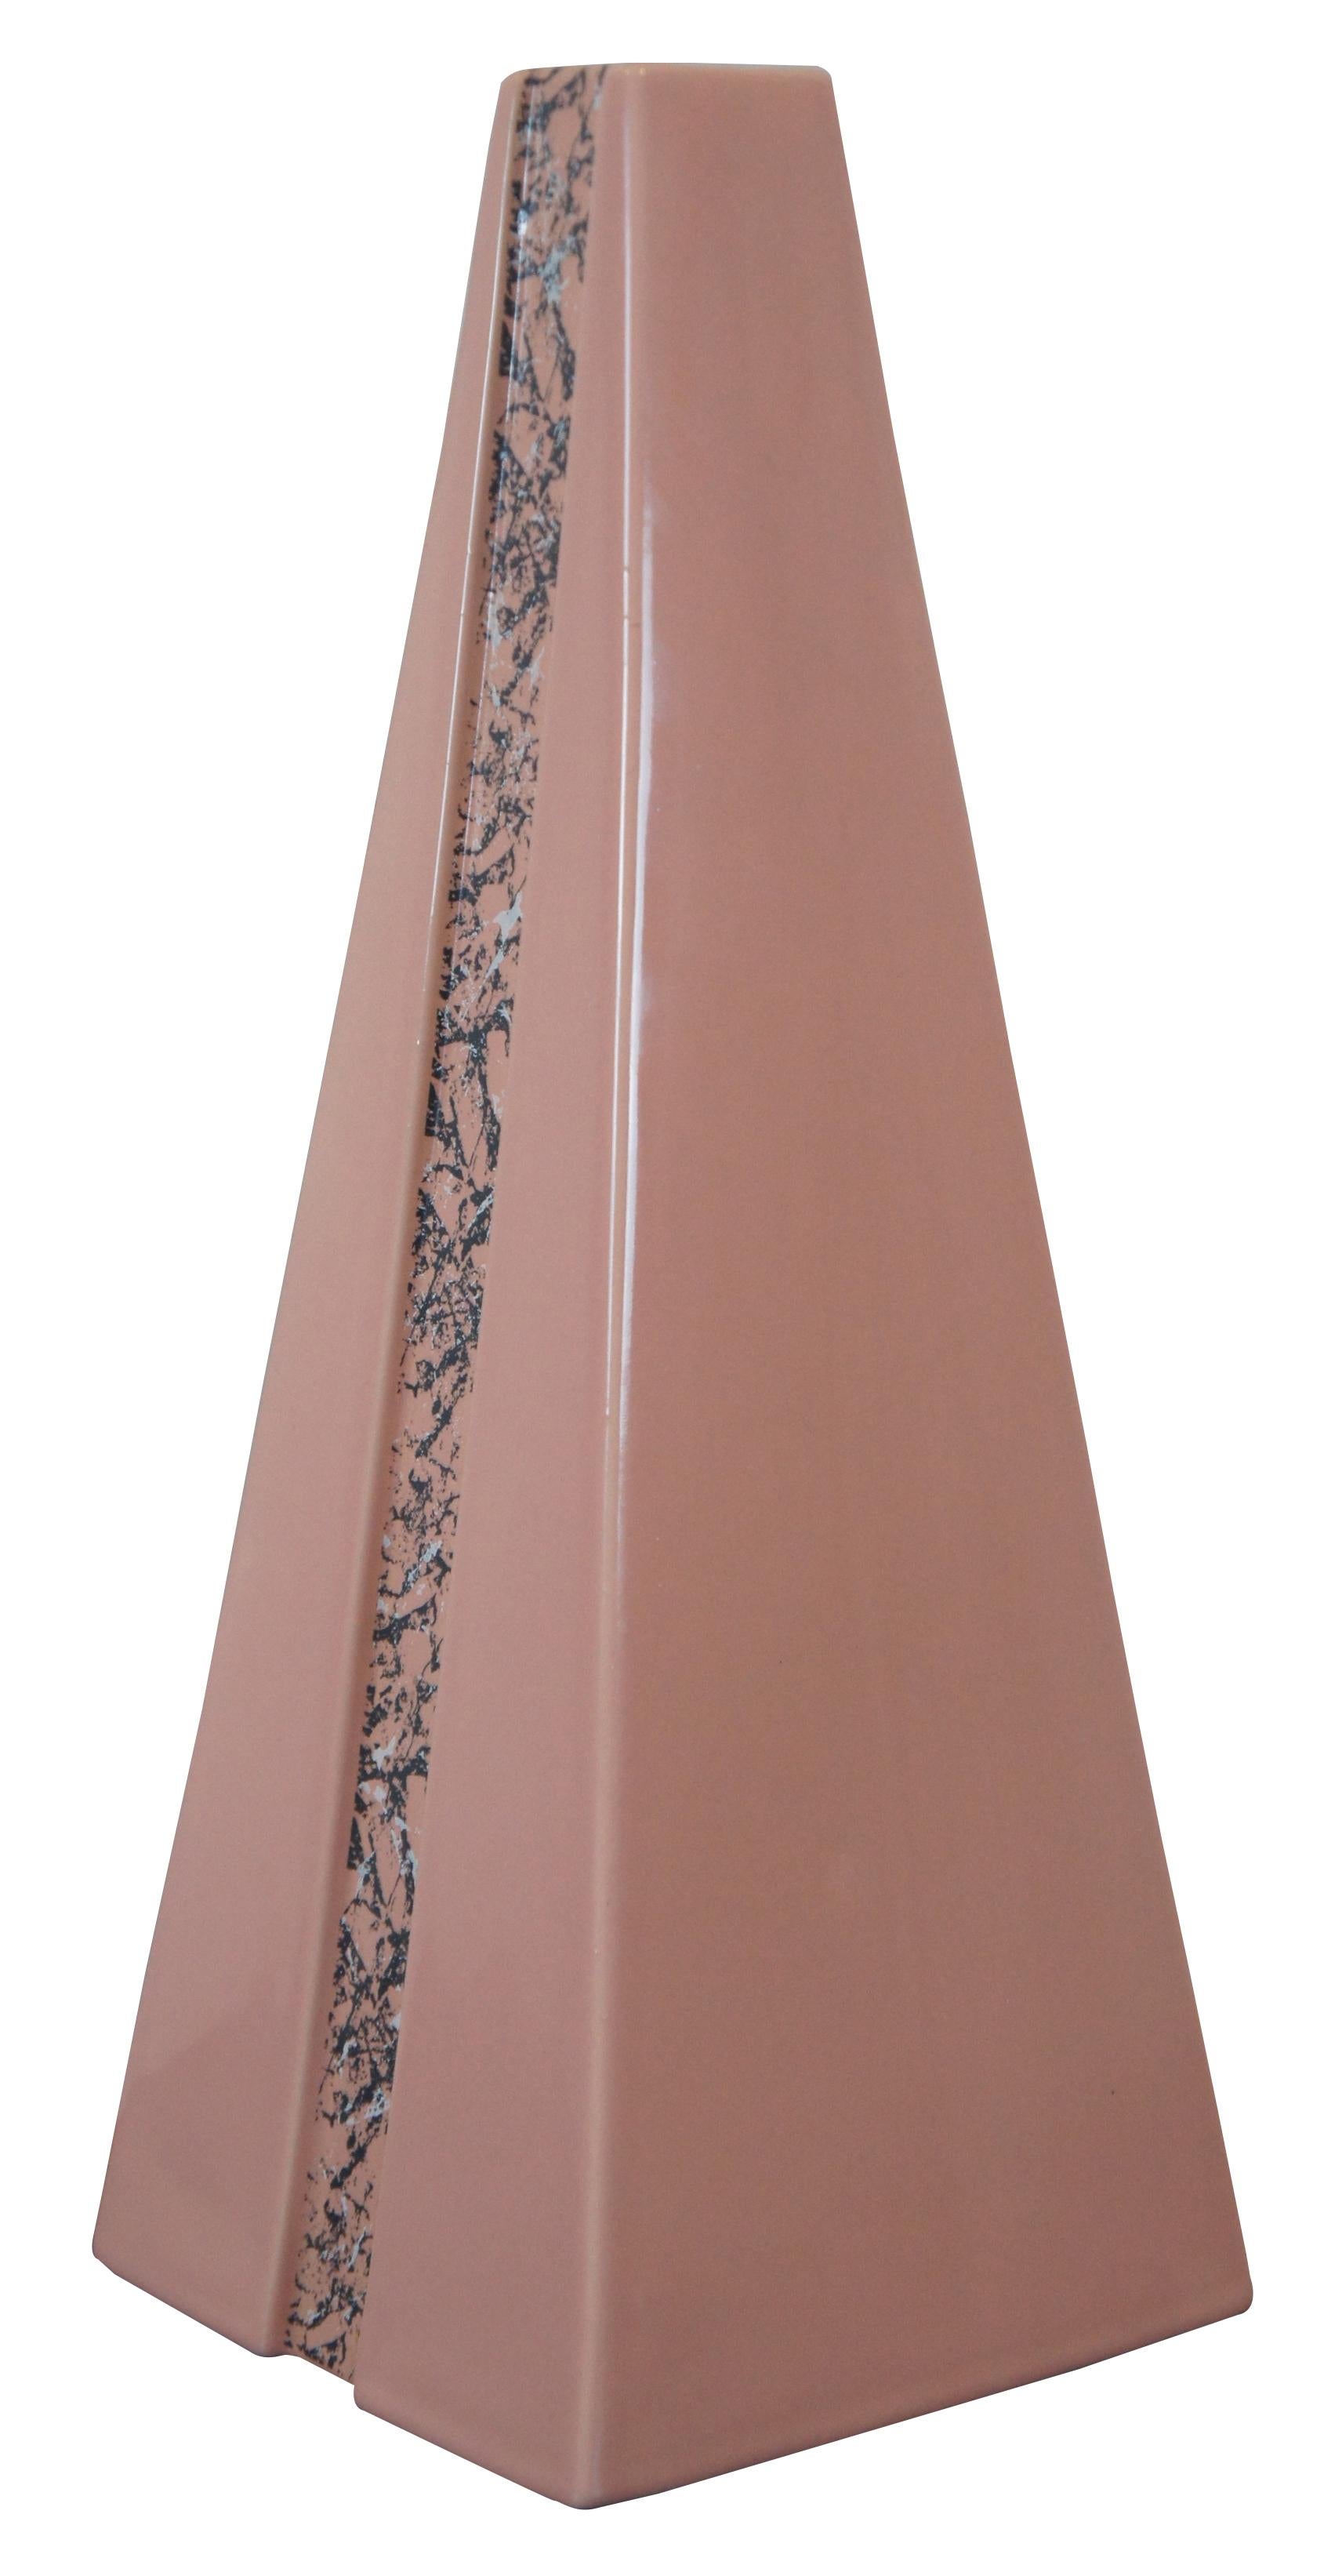 Vintage Art Deco style Haegar vase shaped like a tall pink pyramid with inset marble patterned stripes along the length. Measures: 18”.
  